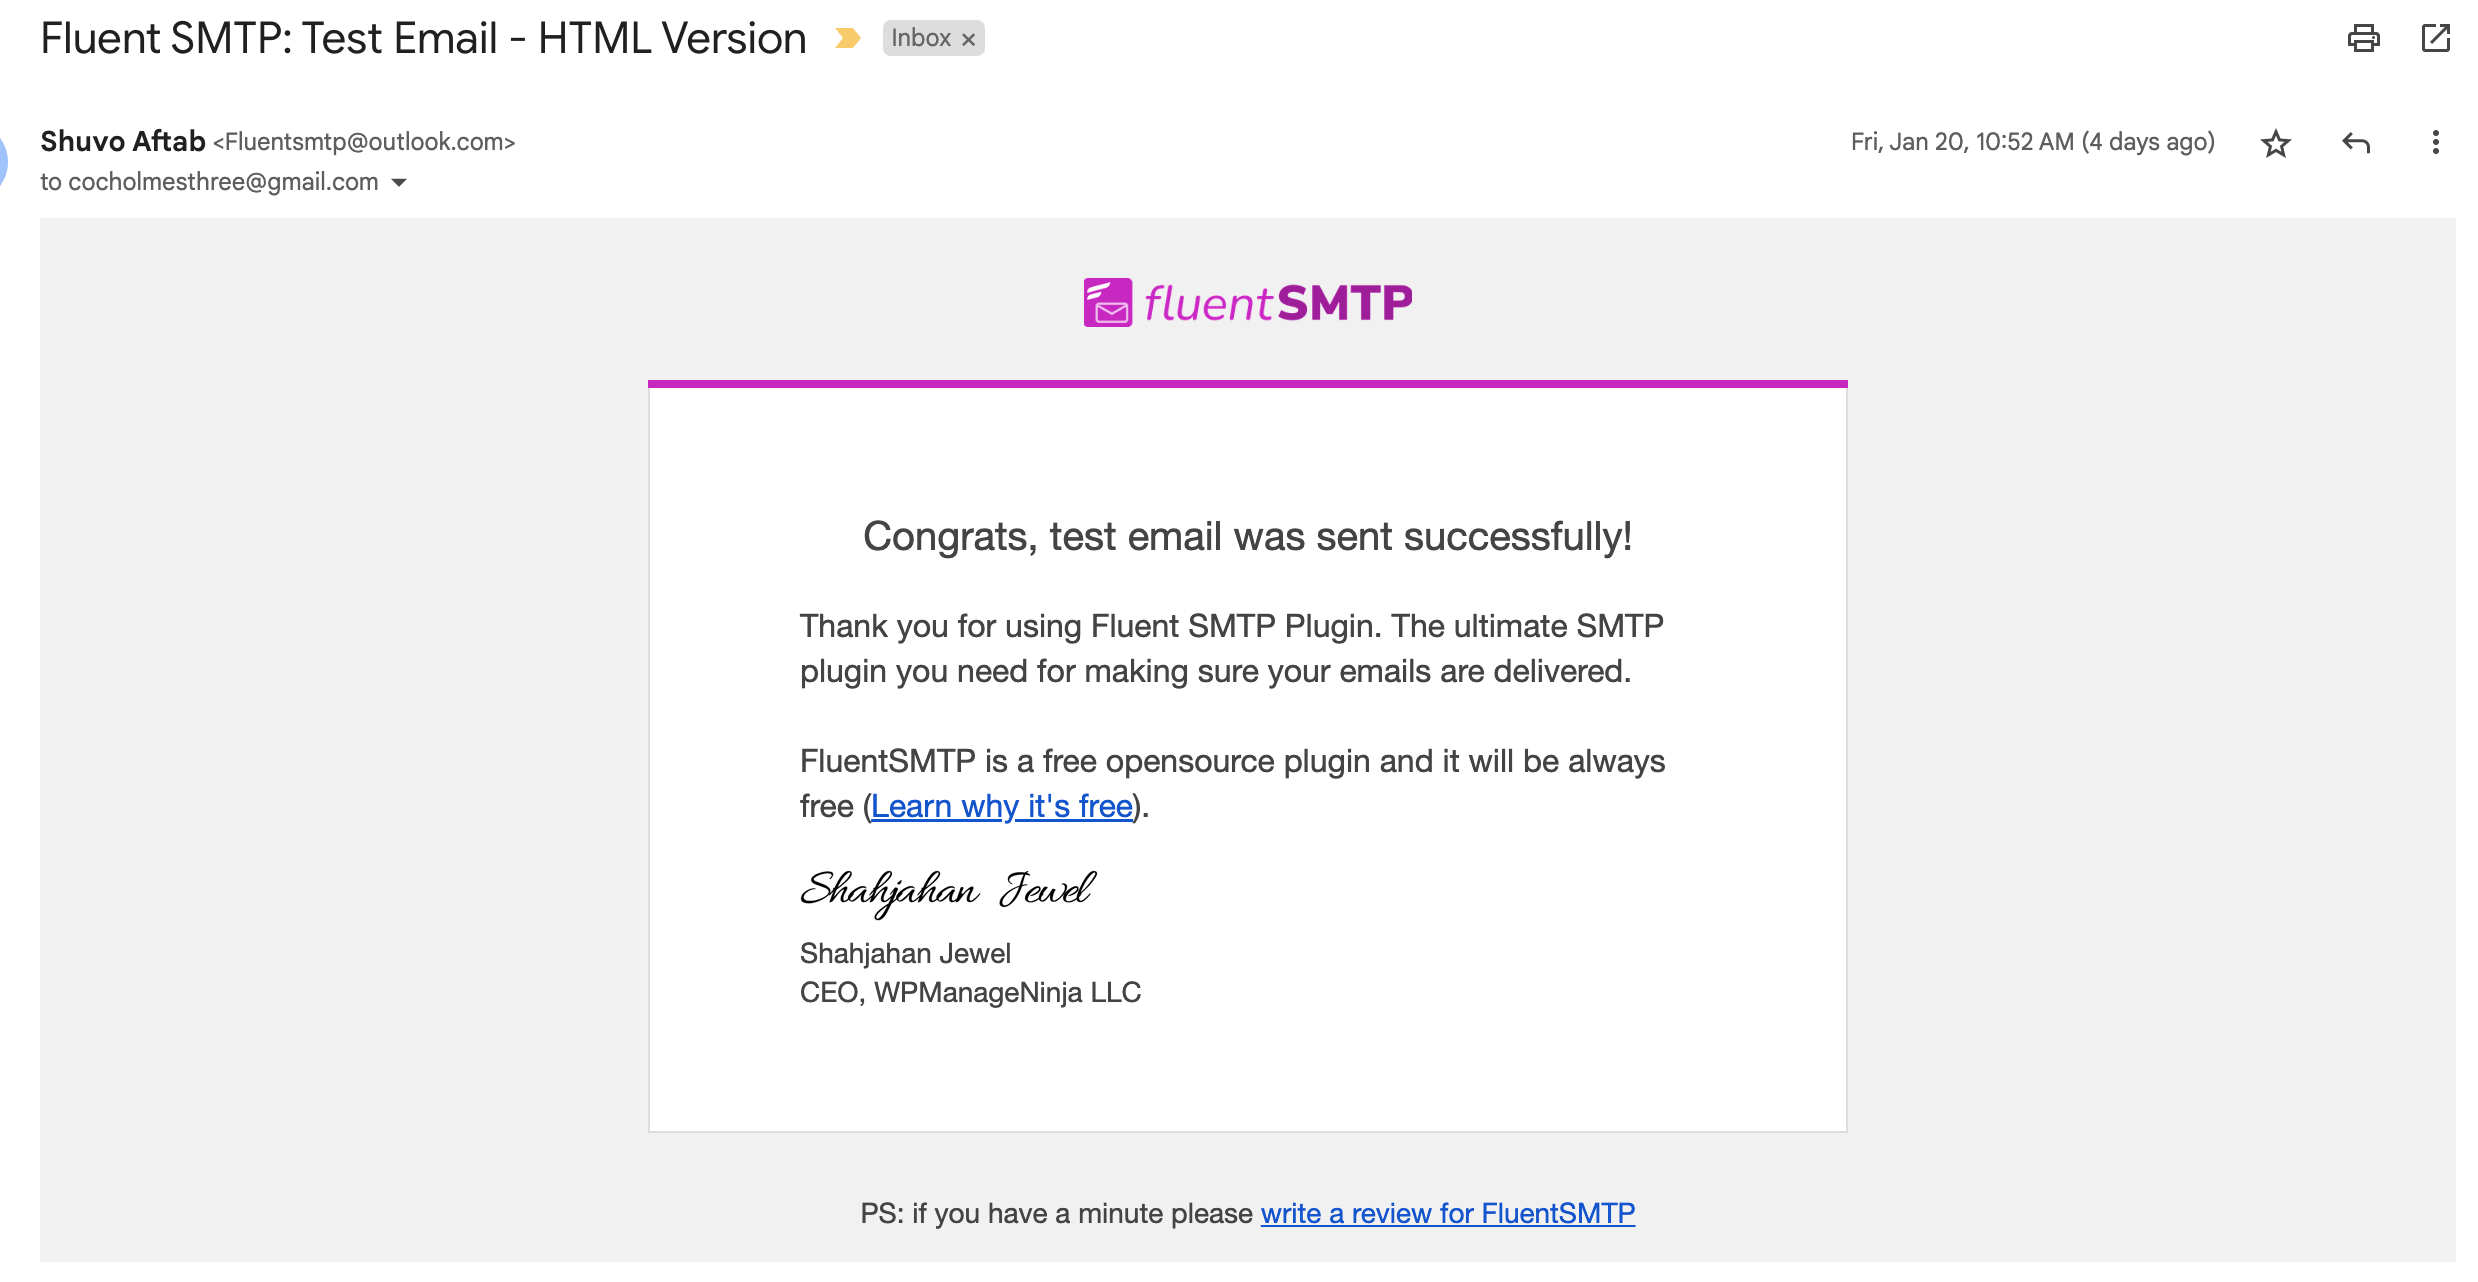 fluent smtp test email received